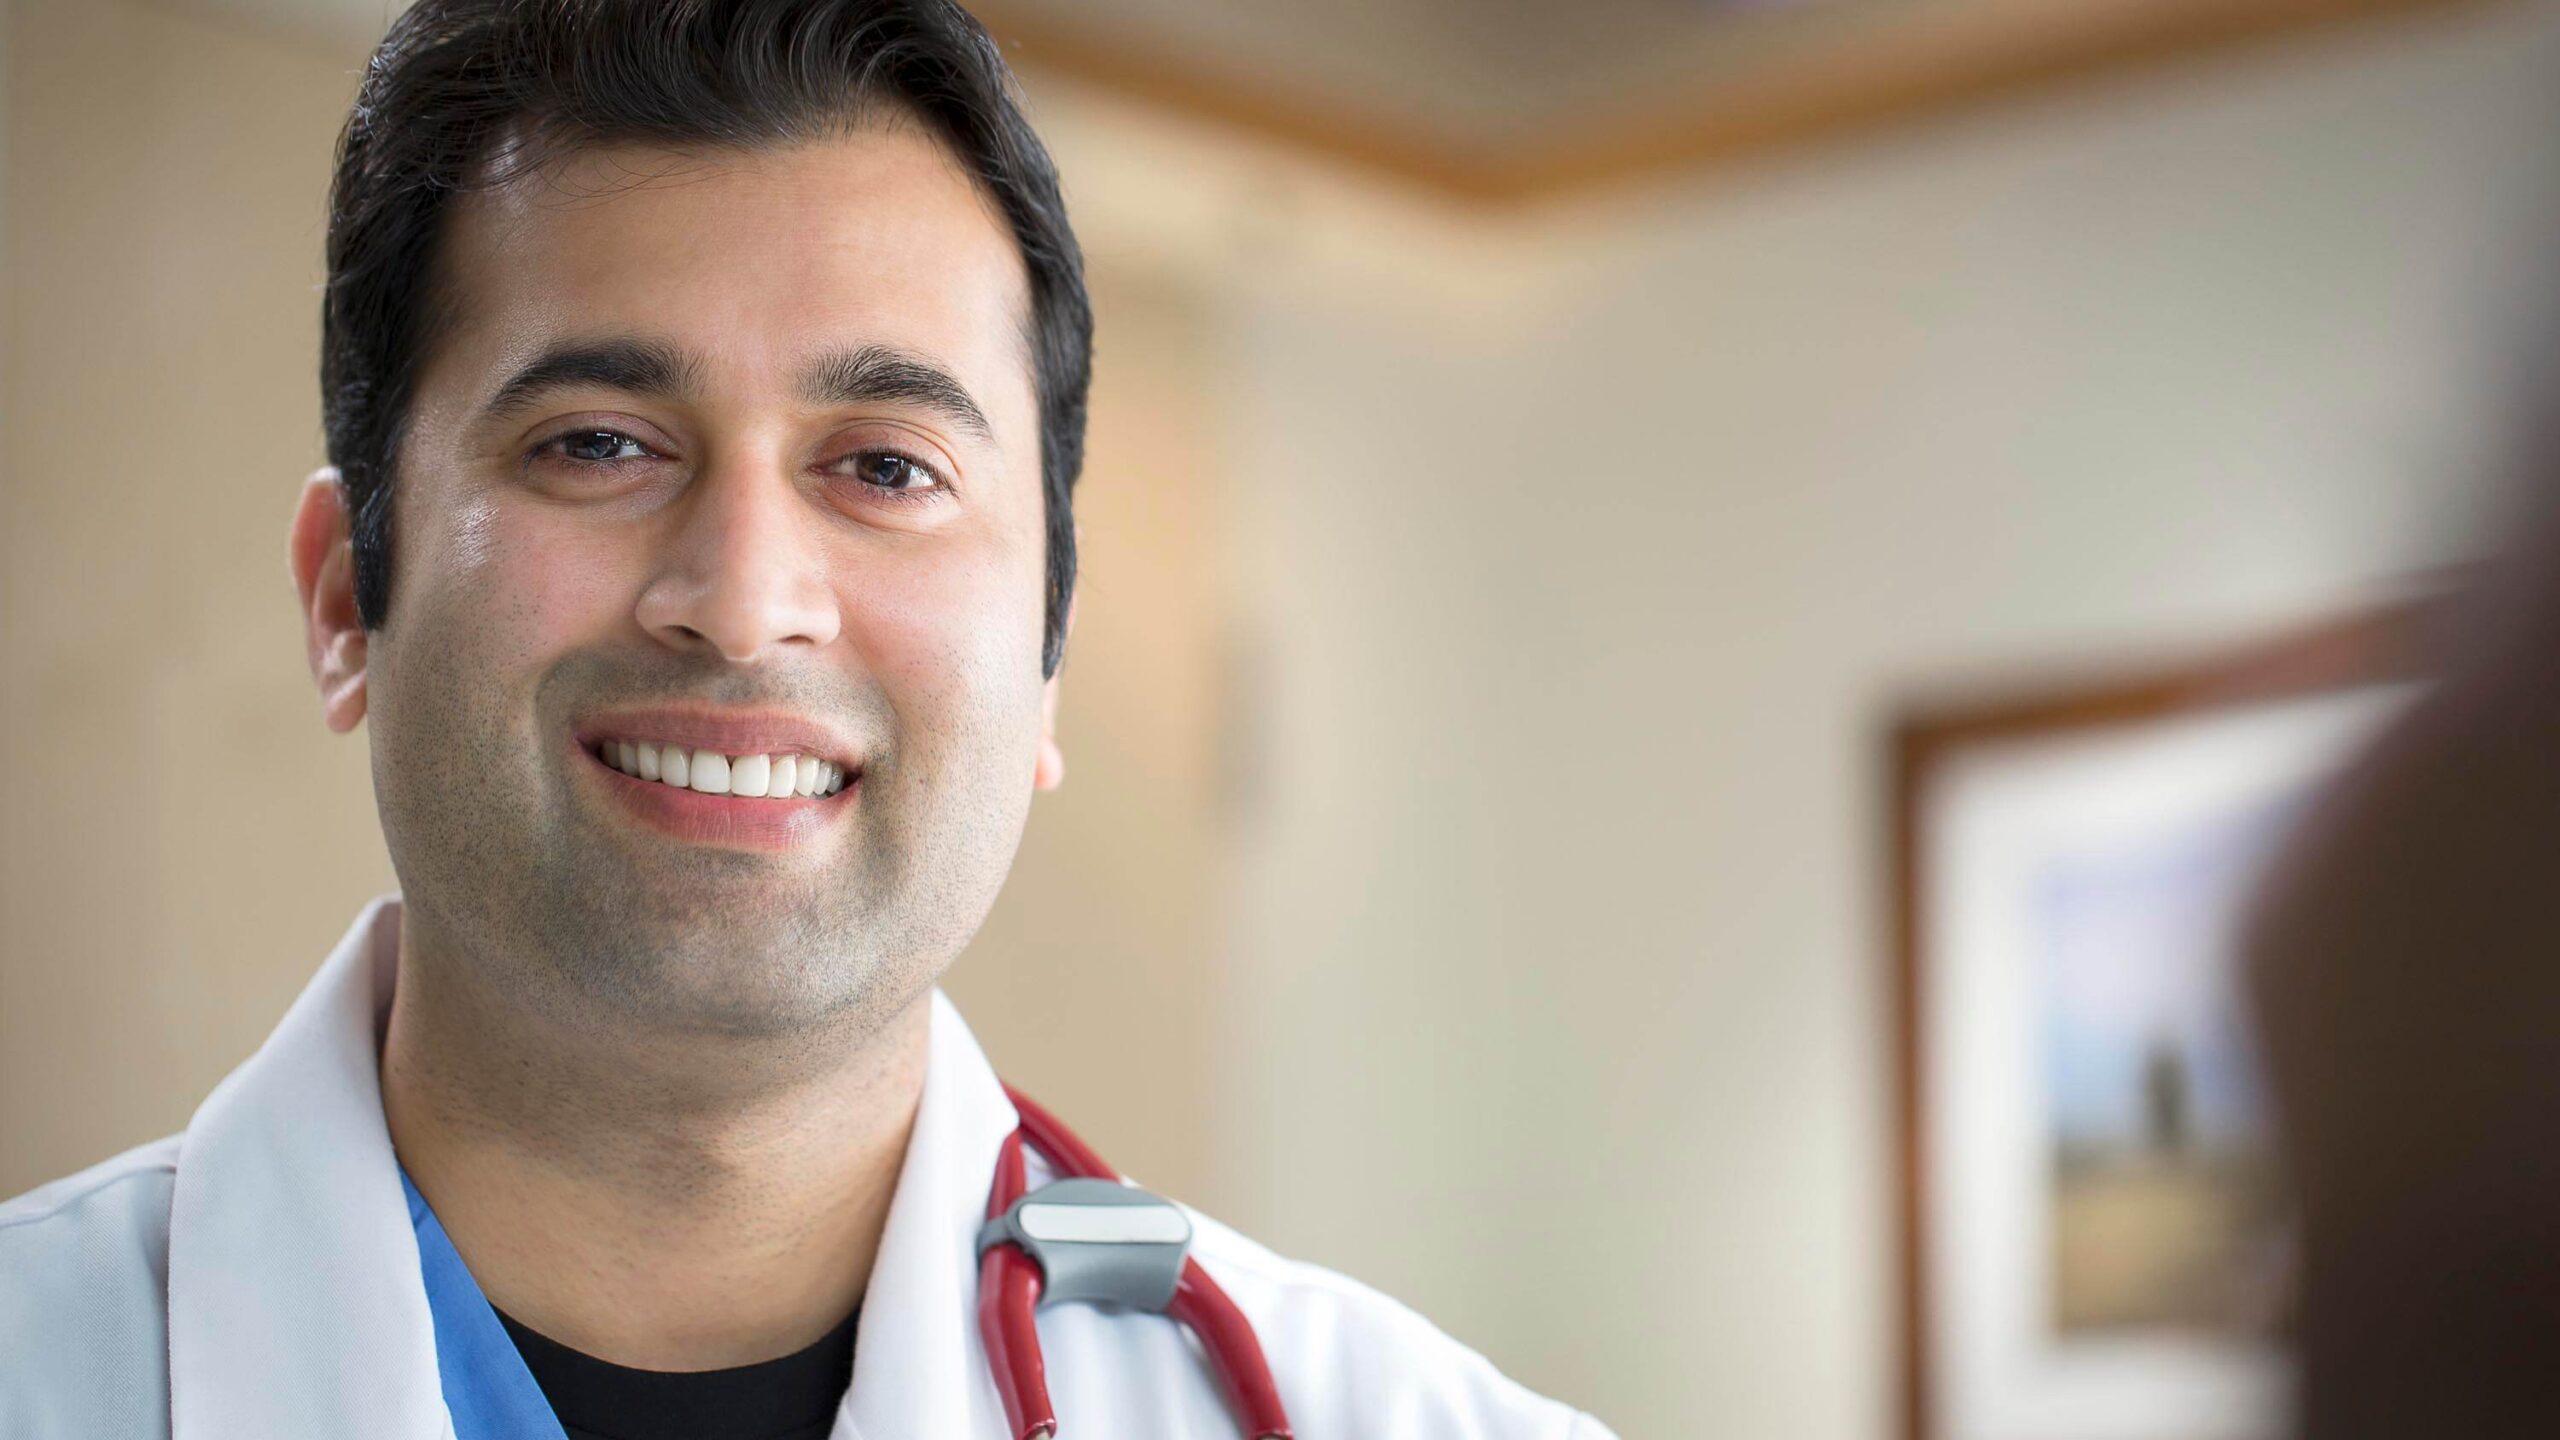 Dr. Amol Baheker, Cardiologist for Cape Fear Valley Health